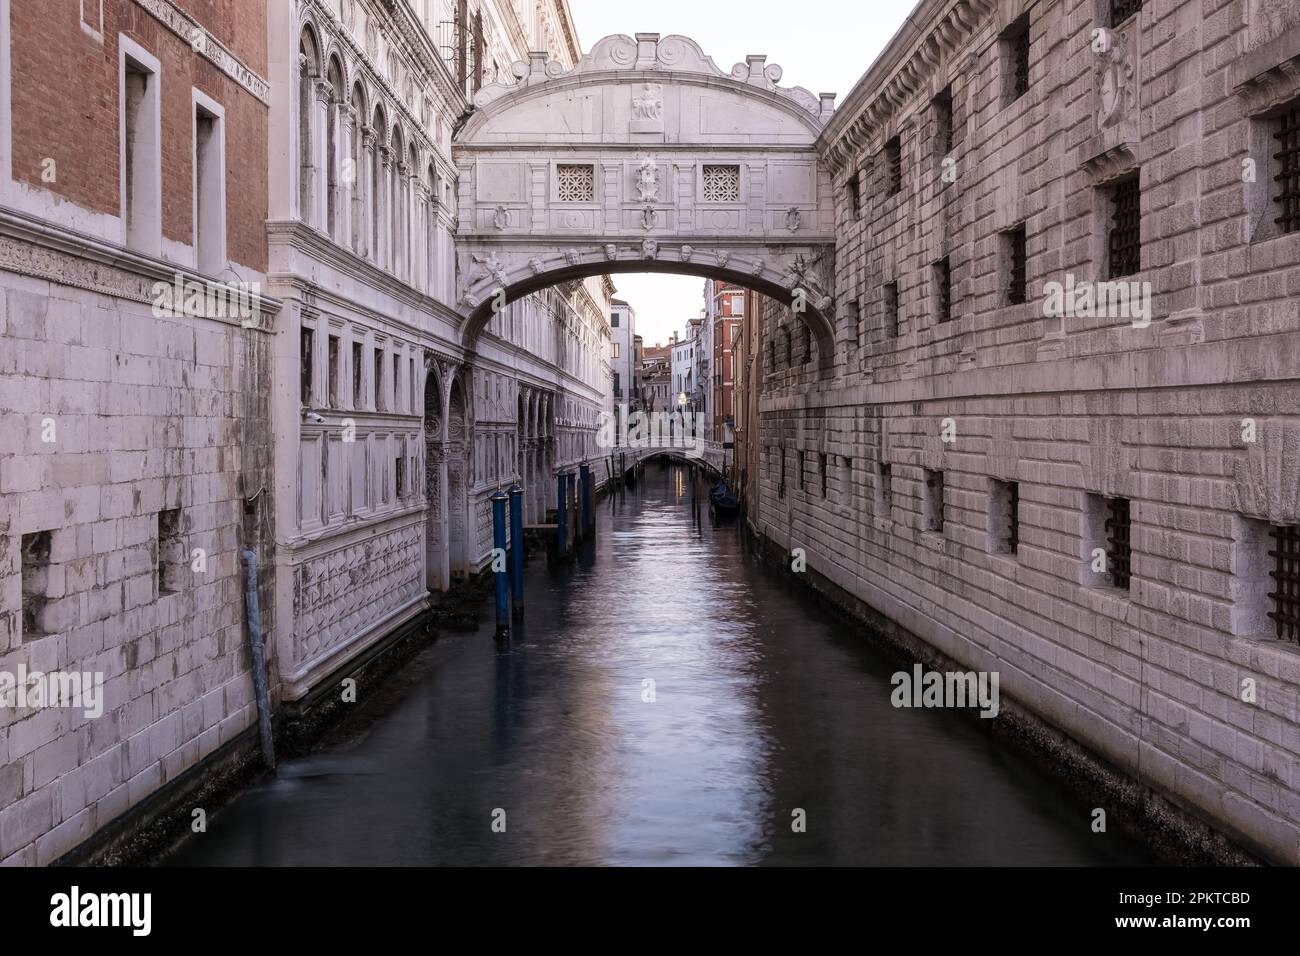 View of the Bridge of Sighs, an enclosed bridge made of white limestone and windows with stone bars, passing over the Rio di Palazzo in Venice, Italy Stock Photo